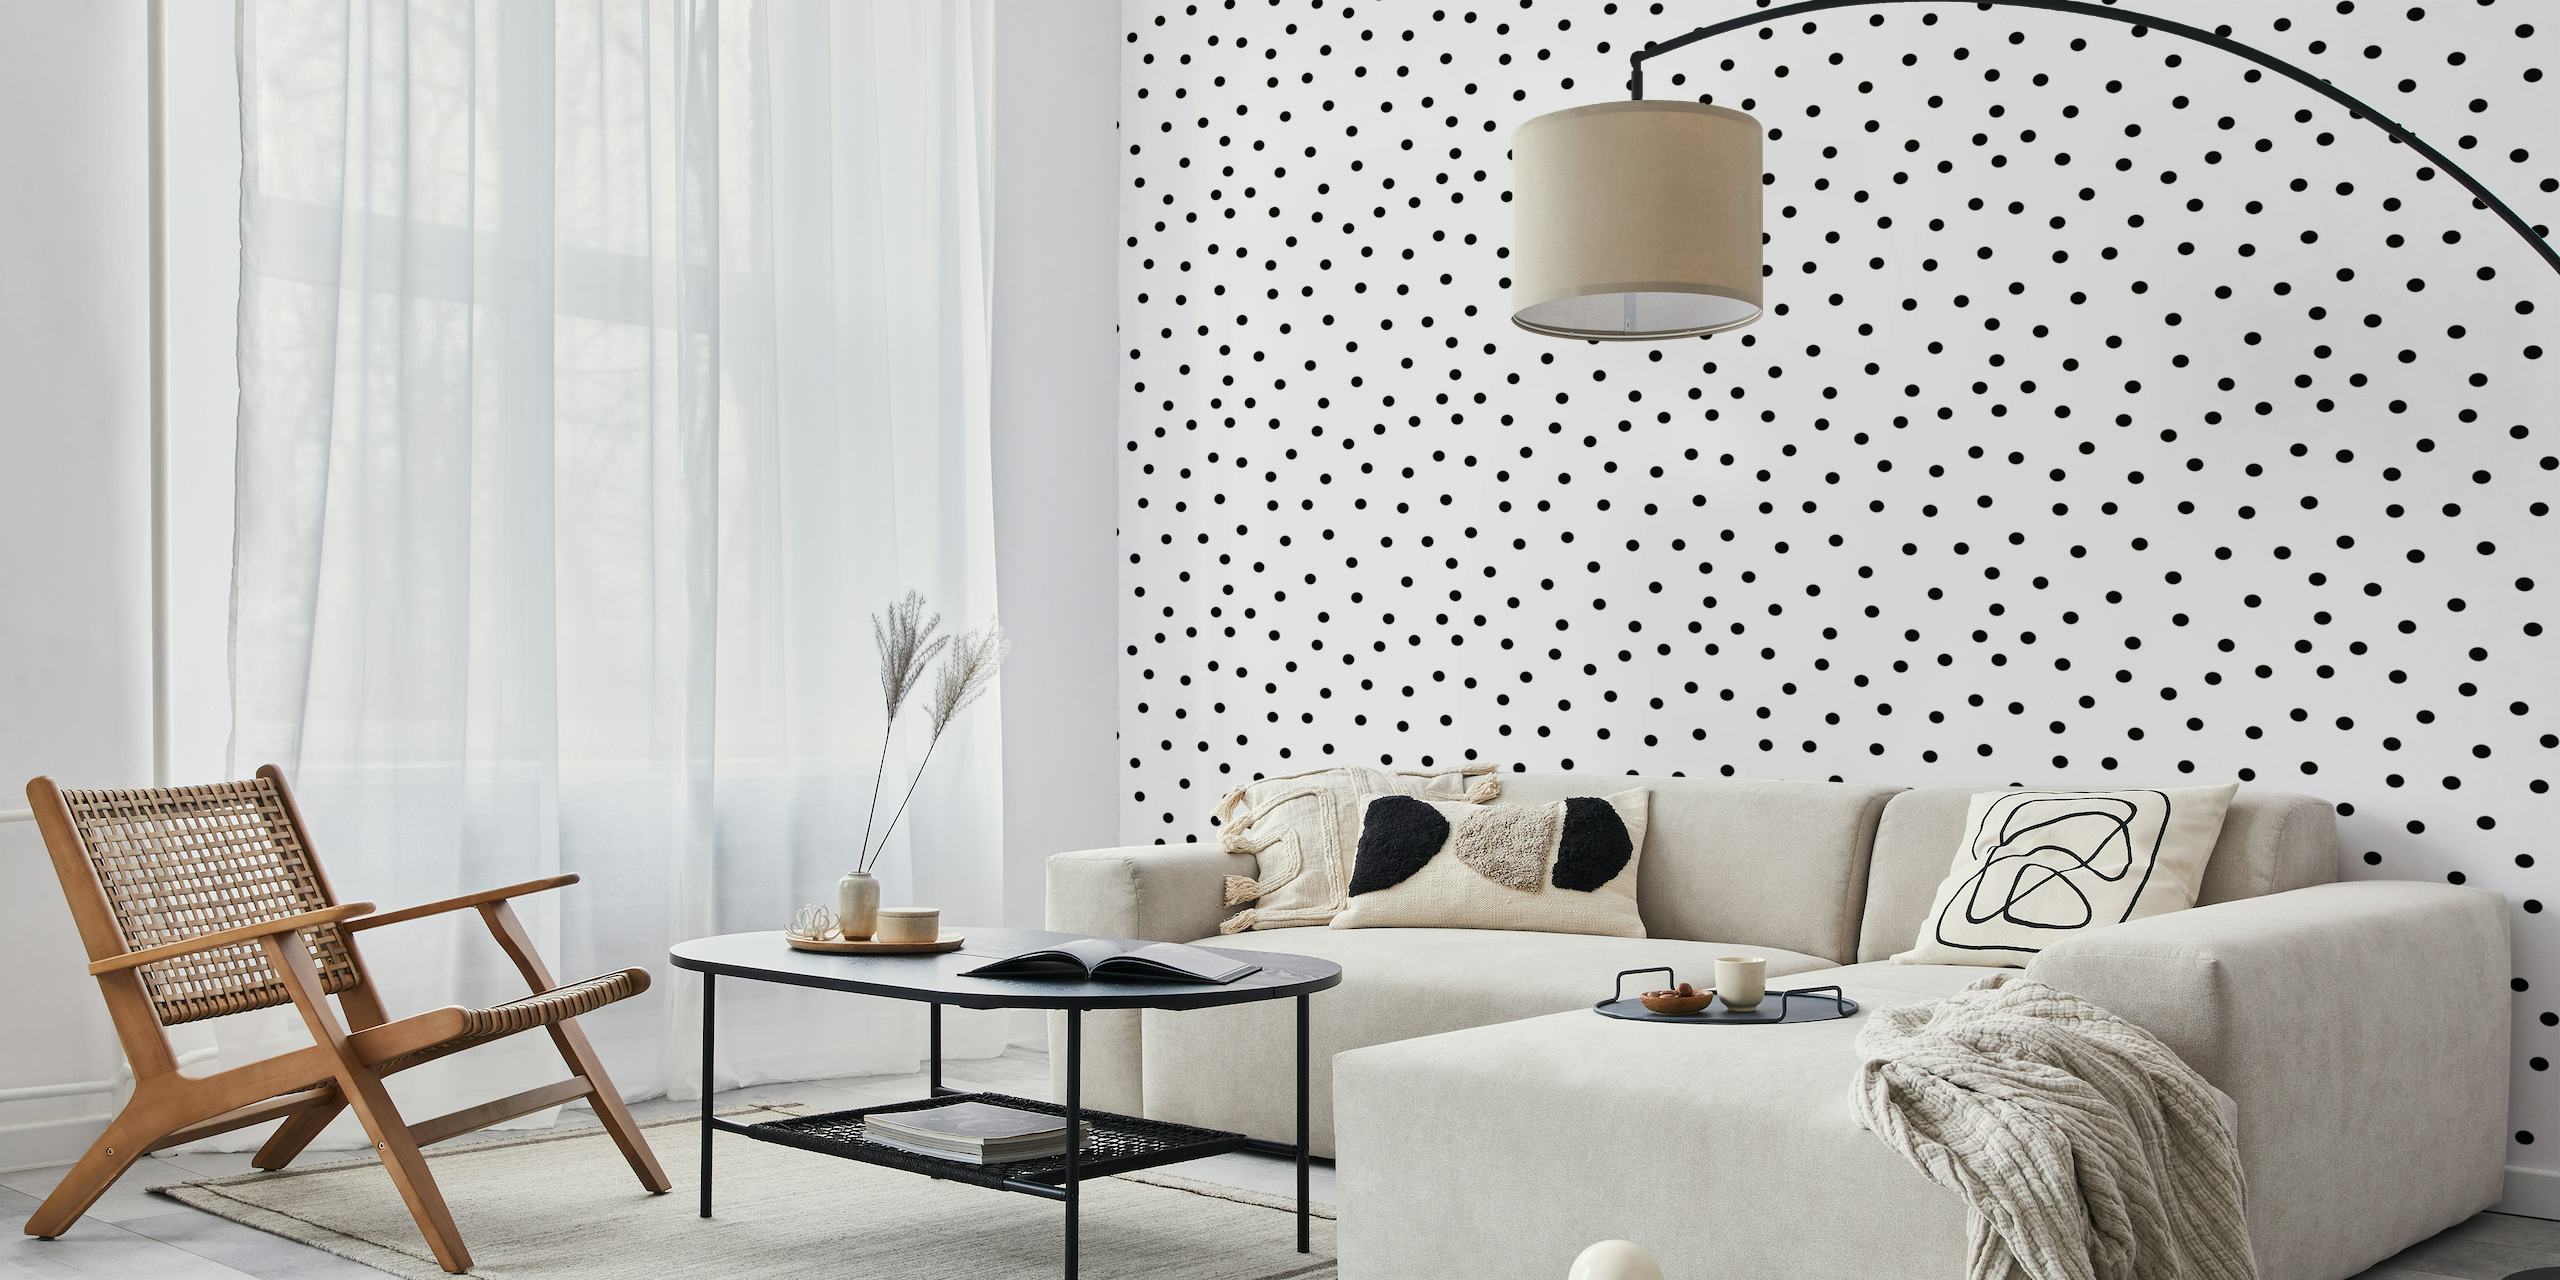 Black dots pattern on a white background wall mural